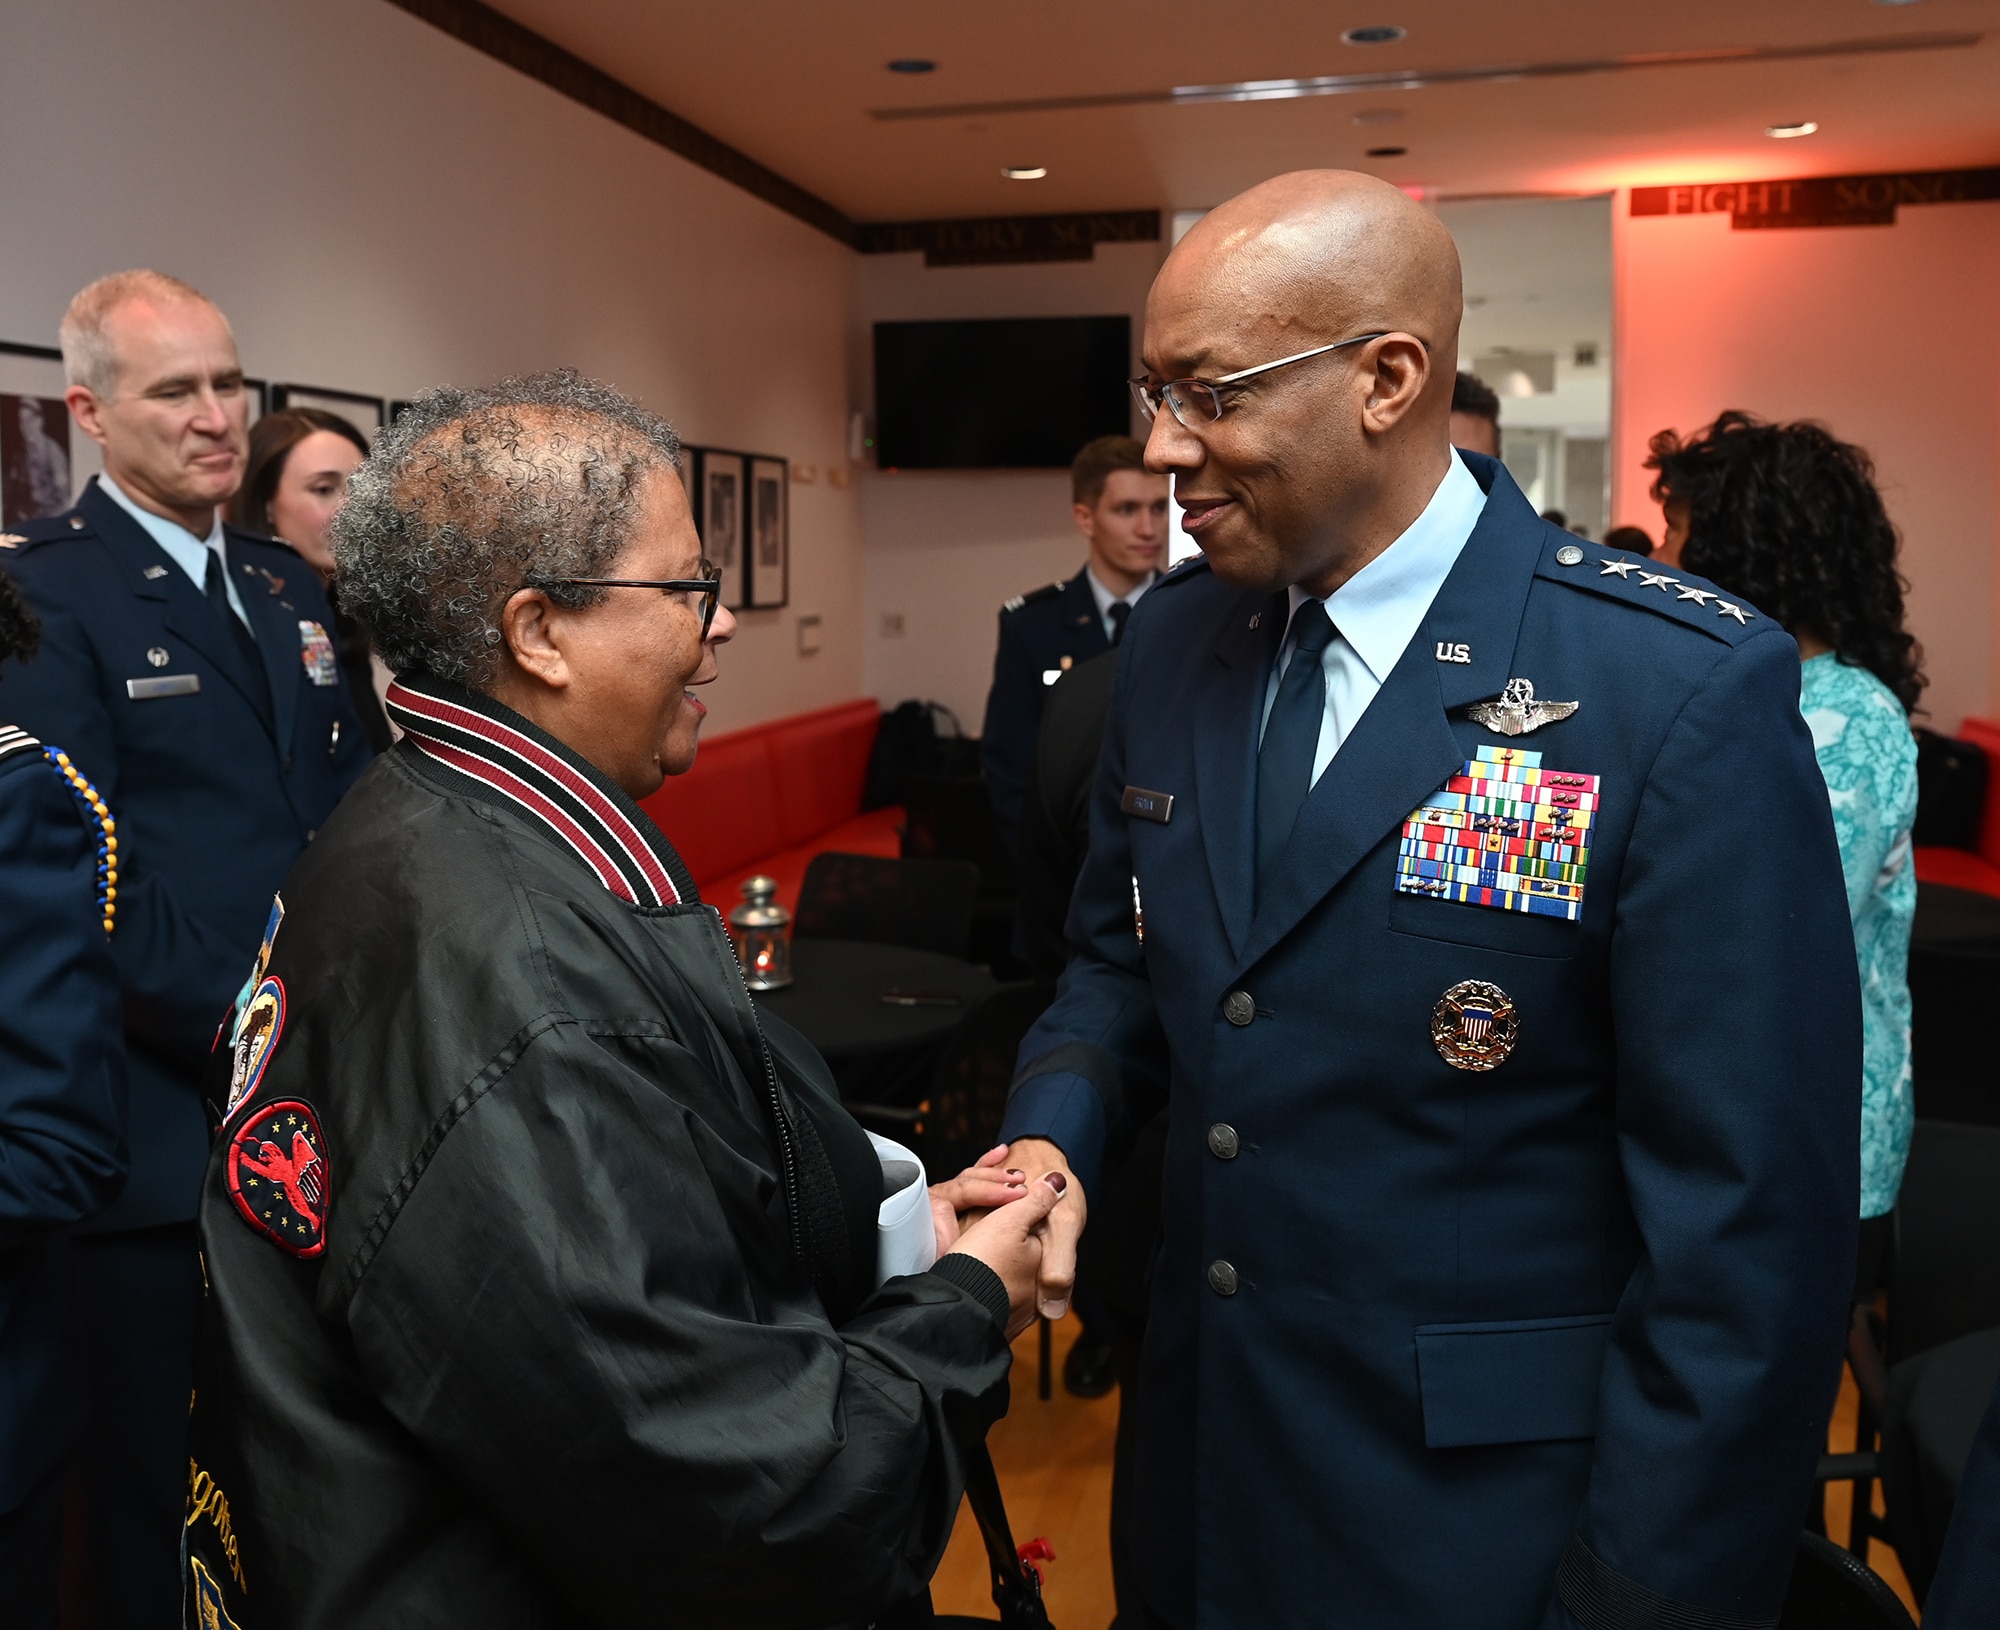 Chief of Staff of the Air Force Gen. CQ Brown, Jr., greets Yvonne McGee, youngest daughter of the late Brig. Gen. Charles McGee, before a ceremony at the Samuel Riggs IV Alumni Center, College Park, Md., Jan 27, 2023. Brown was on hand to award a scholarship named after the late general to a deserving University of Maryland cadet.